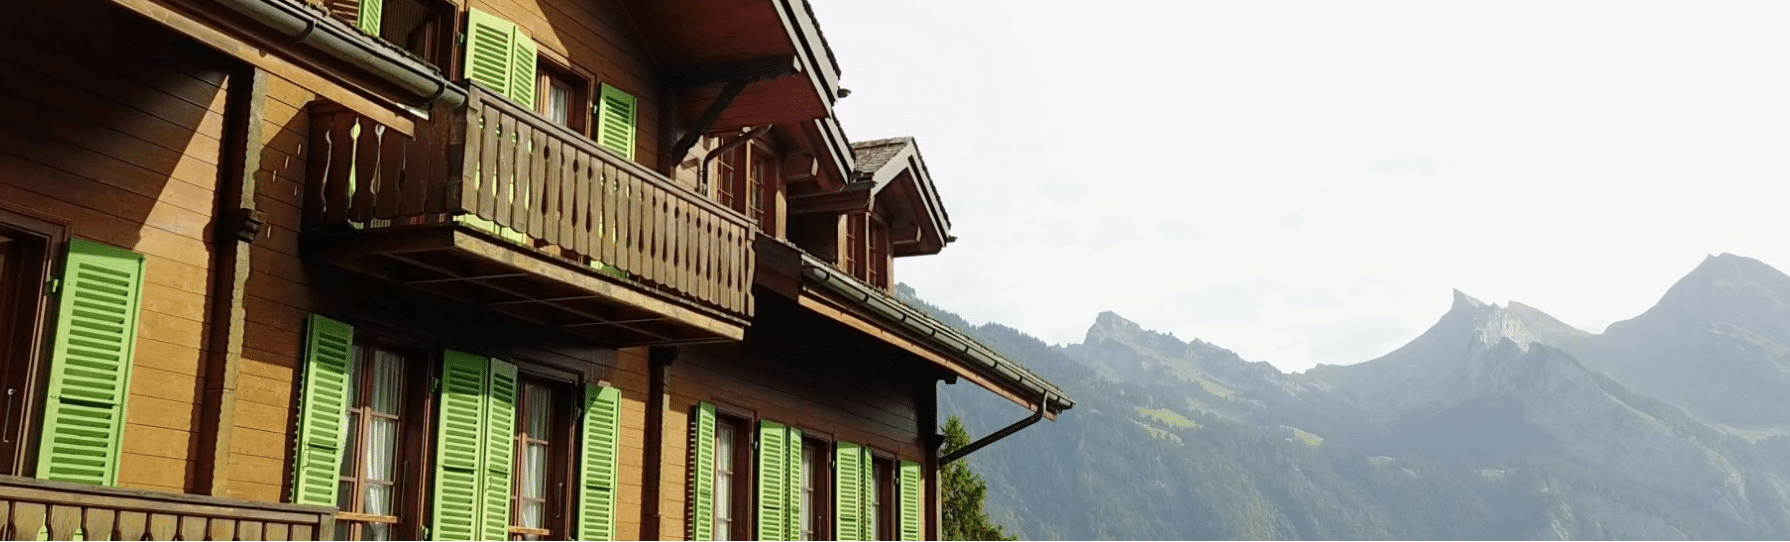 Isenfluh Berghaus,  Action Biblique vacation/retreat center in the alps